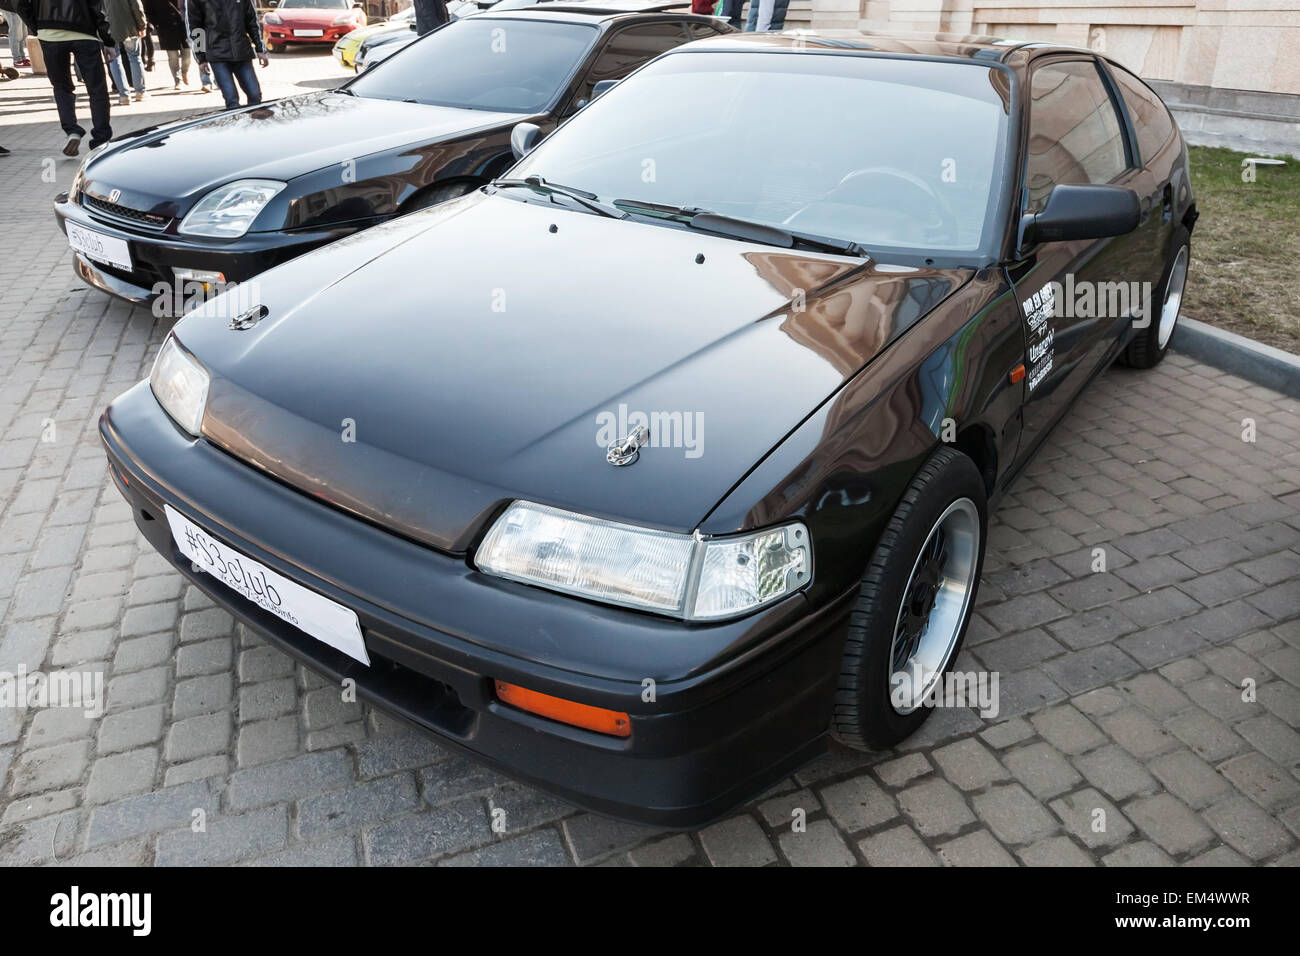 Saint-Petersburg, Russia - April 11, 2015: Black sporty classical Honda Civic CRX stands parked on the city street Stock Photo